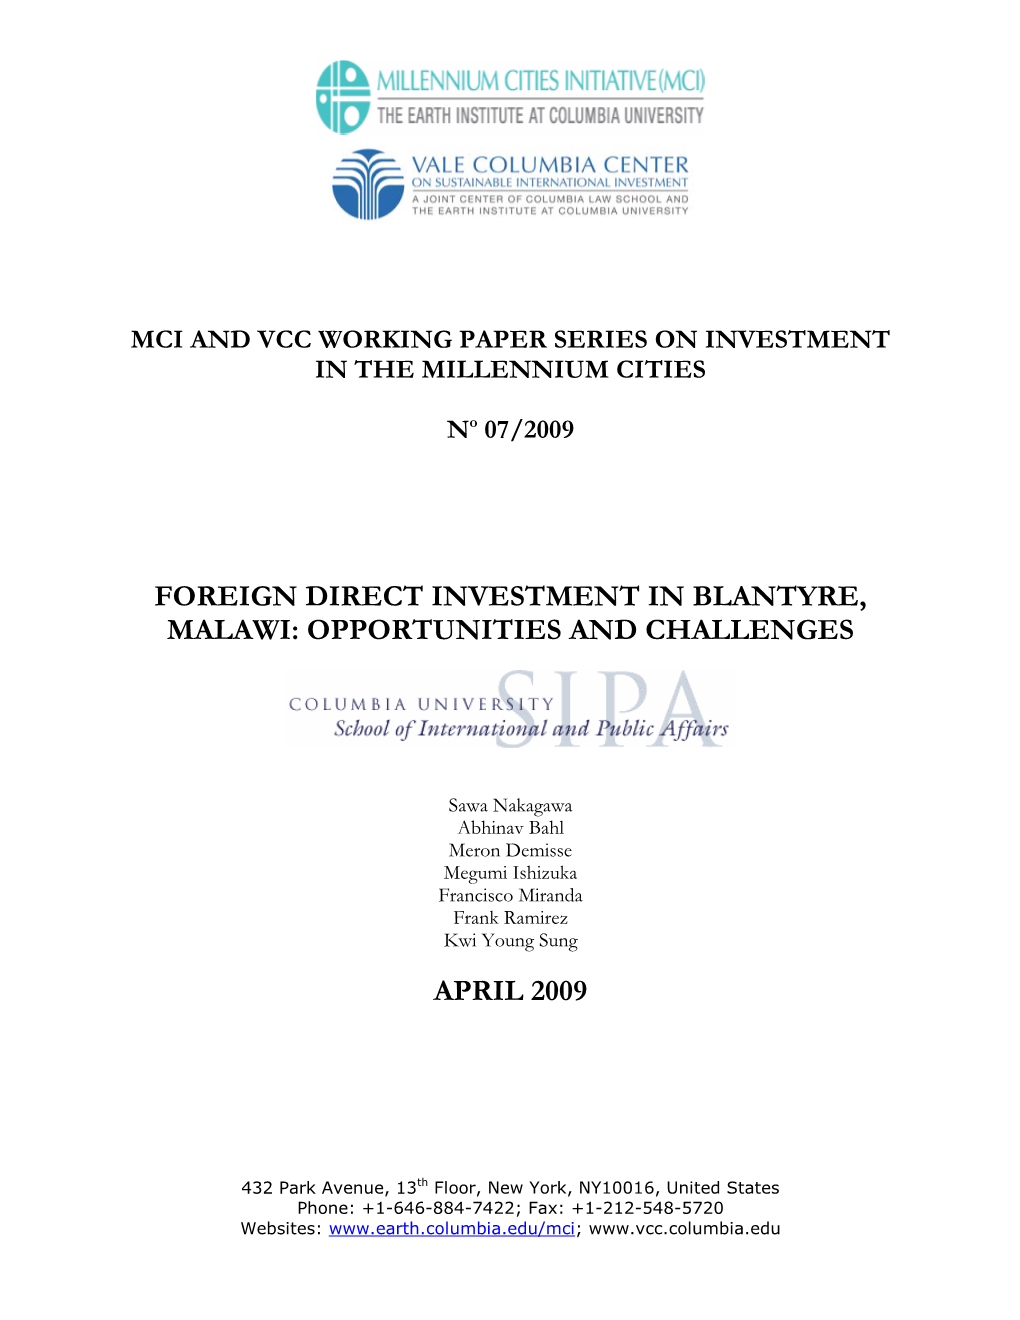 Foreign Direct Investment in Blantyre, Malawi: Opportunities and Challenges